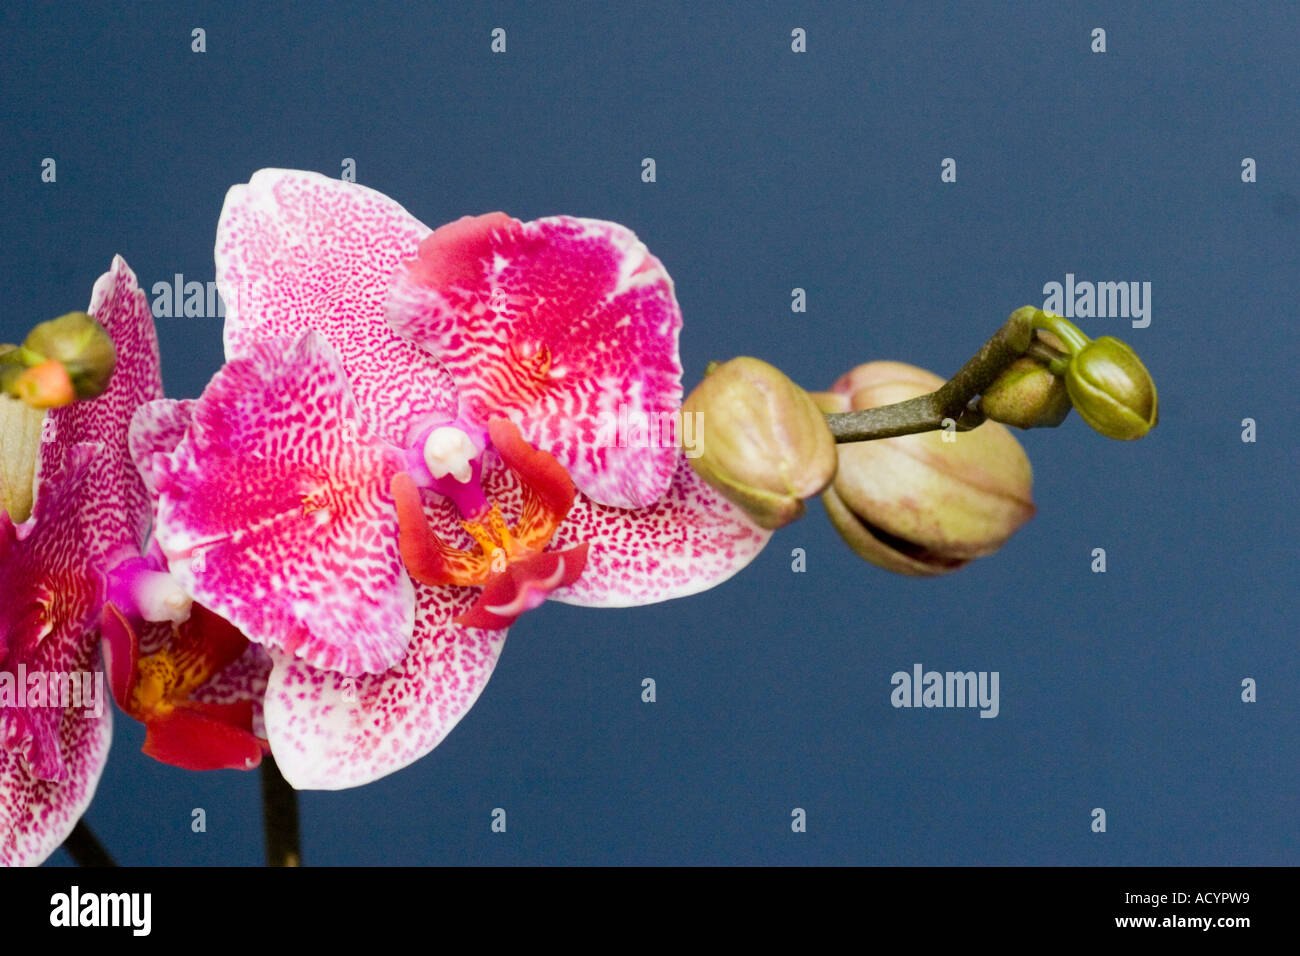 Orchid Phalaenopsis Moth orchid close up Stock Photo